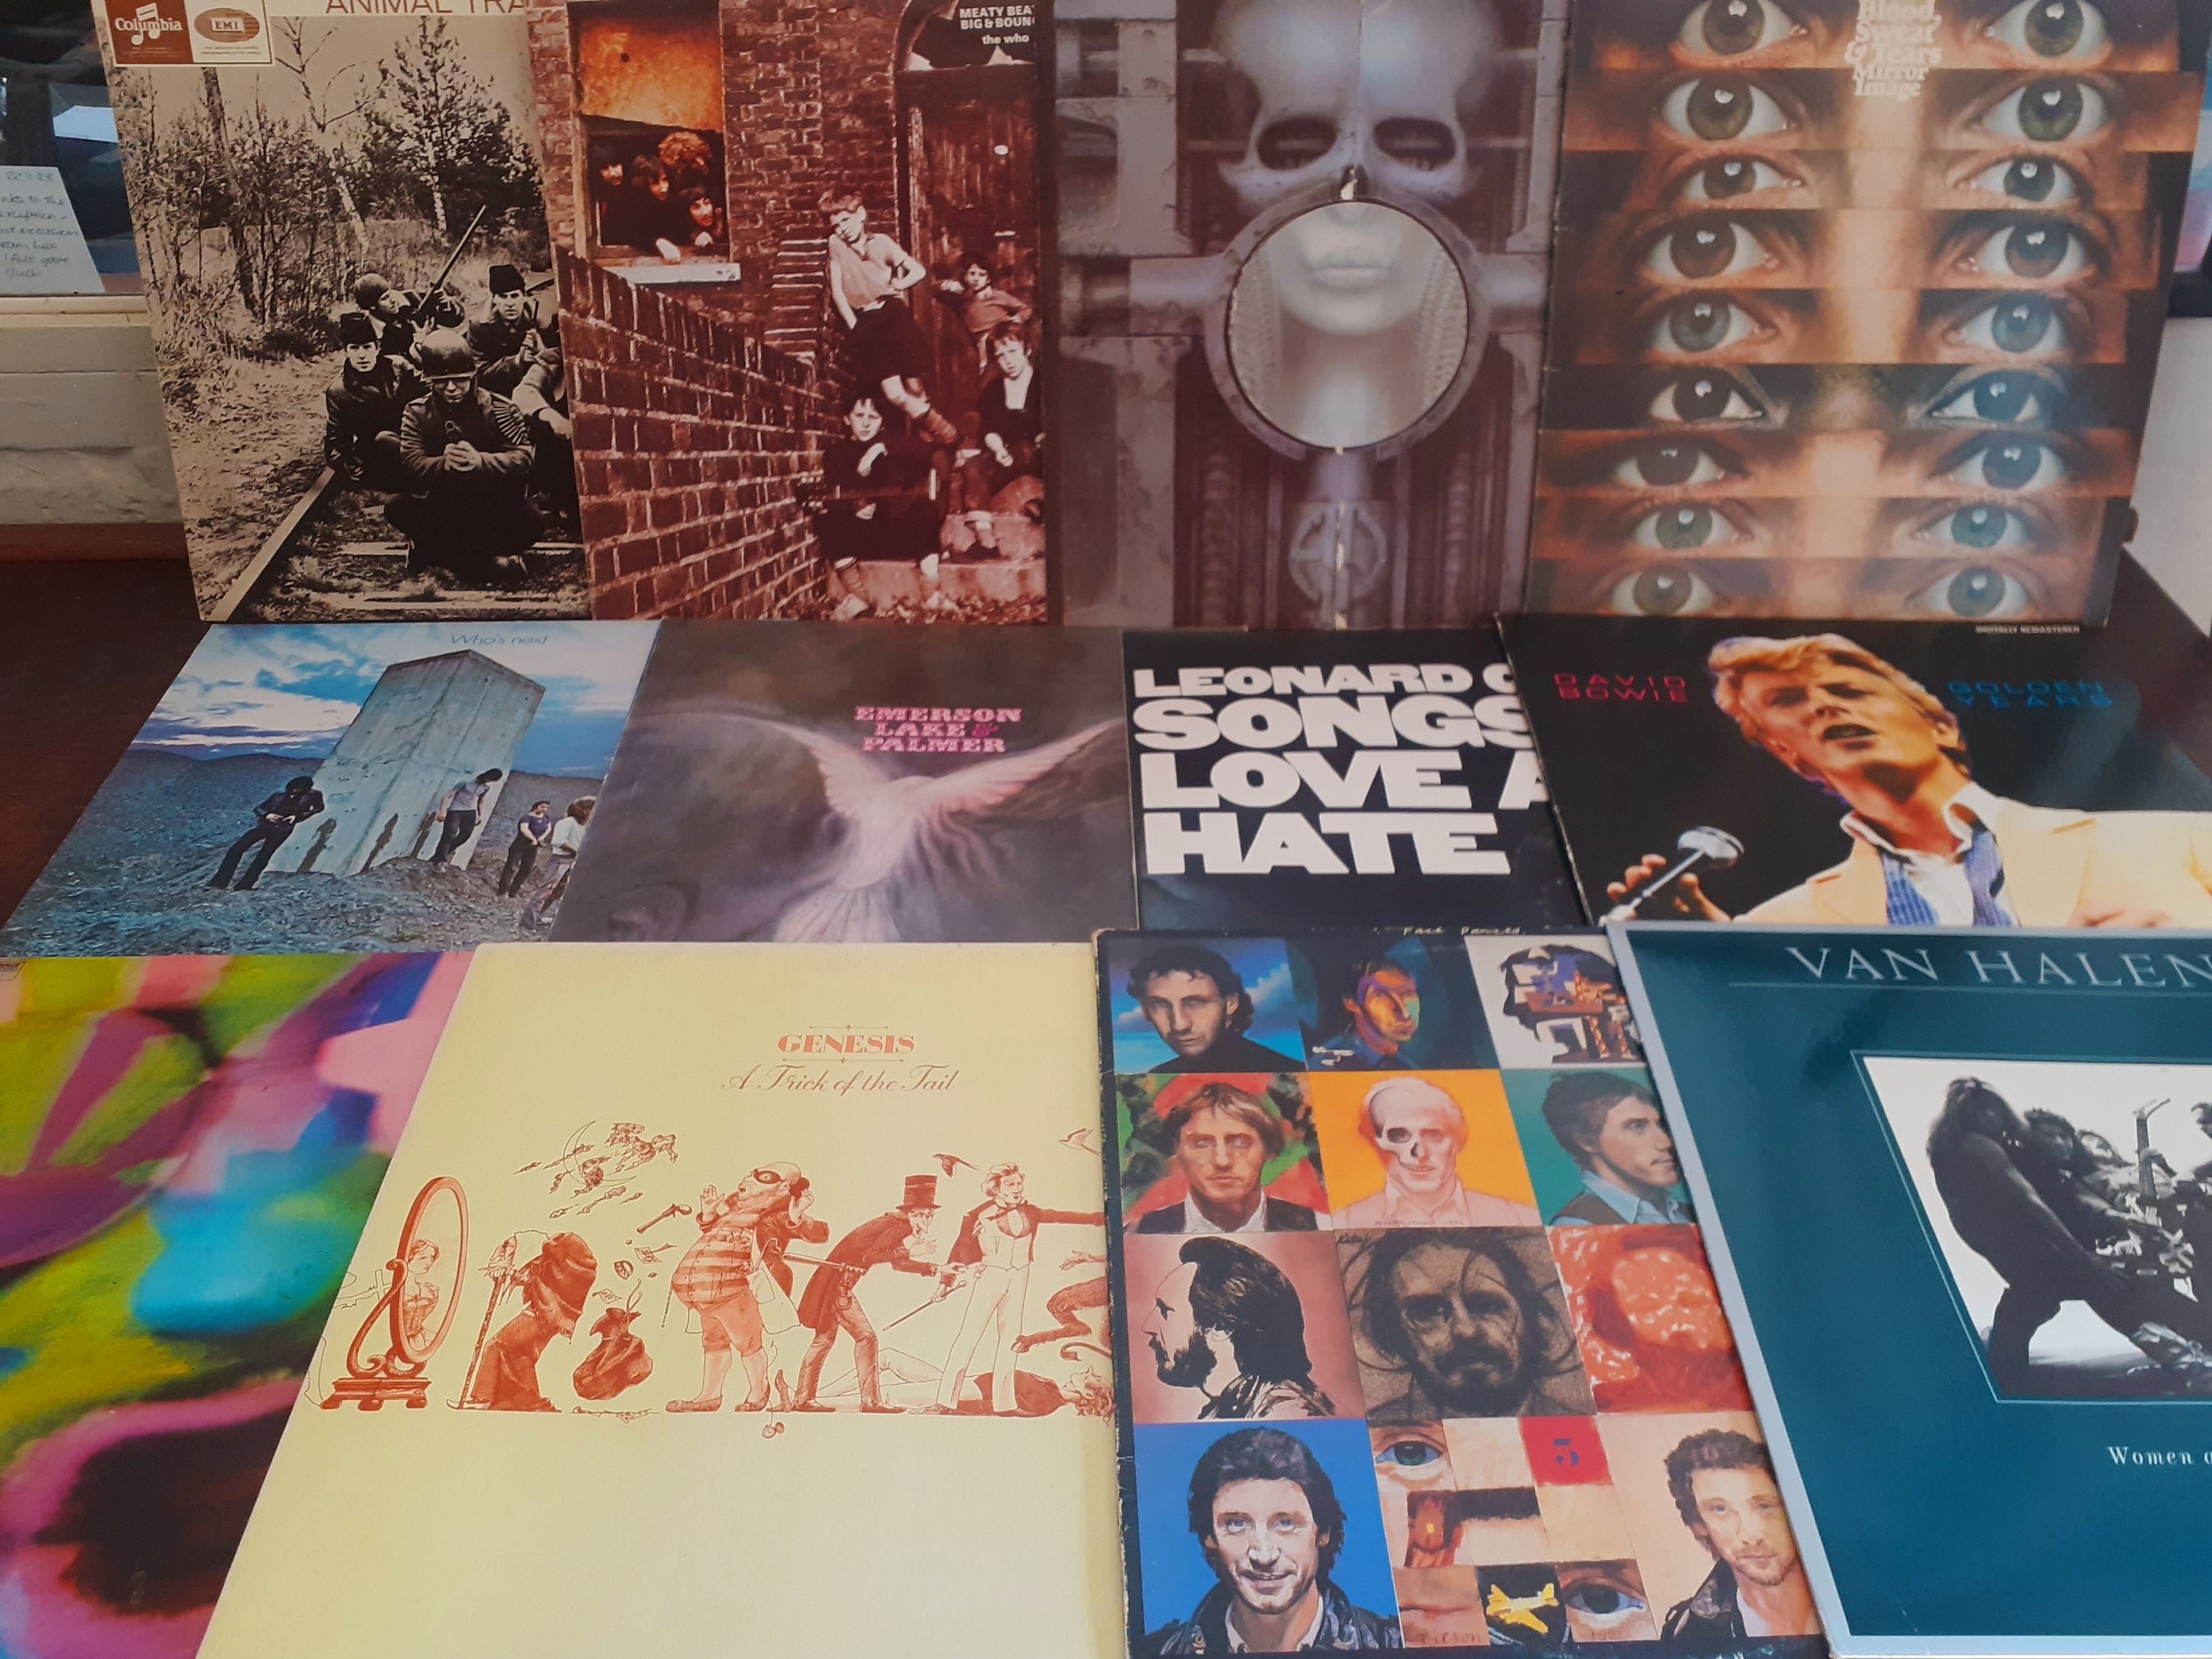 A quantity of 15 vintage LP's and music memorabilia to include The Who, Animals, David Bowie, - Image 2 of 5